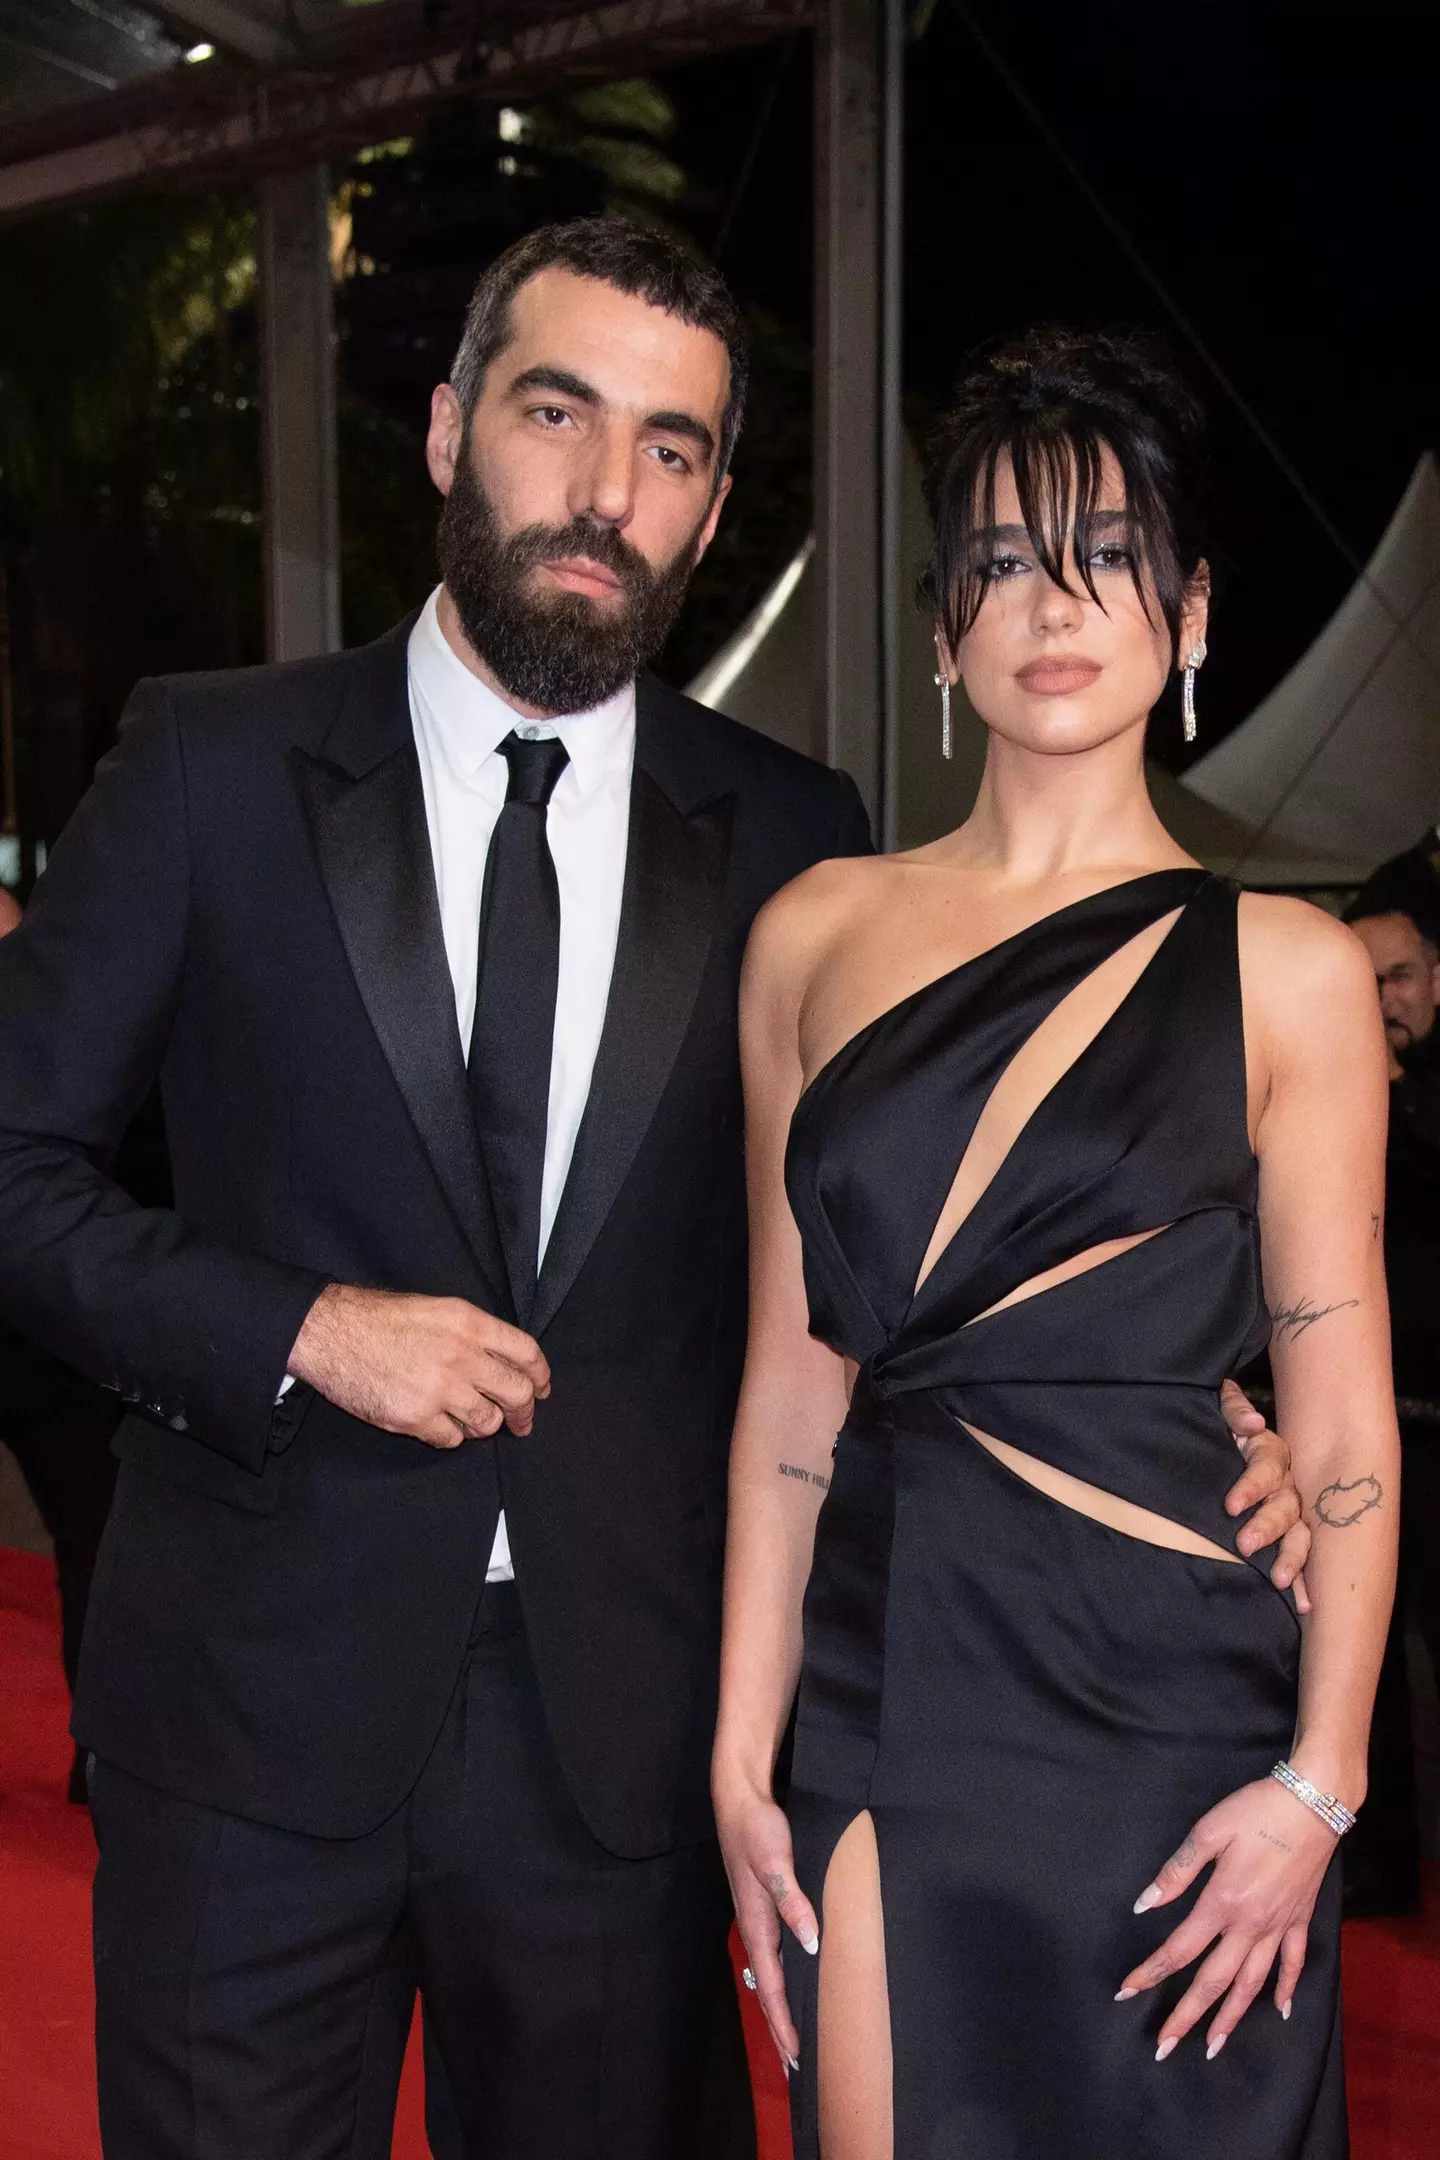 Dua Lipa and Romain Gavras made their red carpet debut over the weekend.